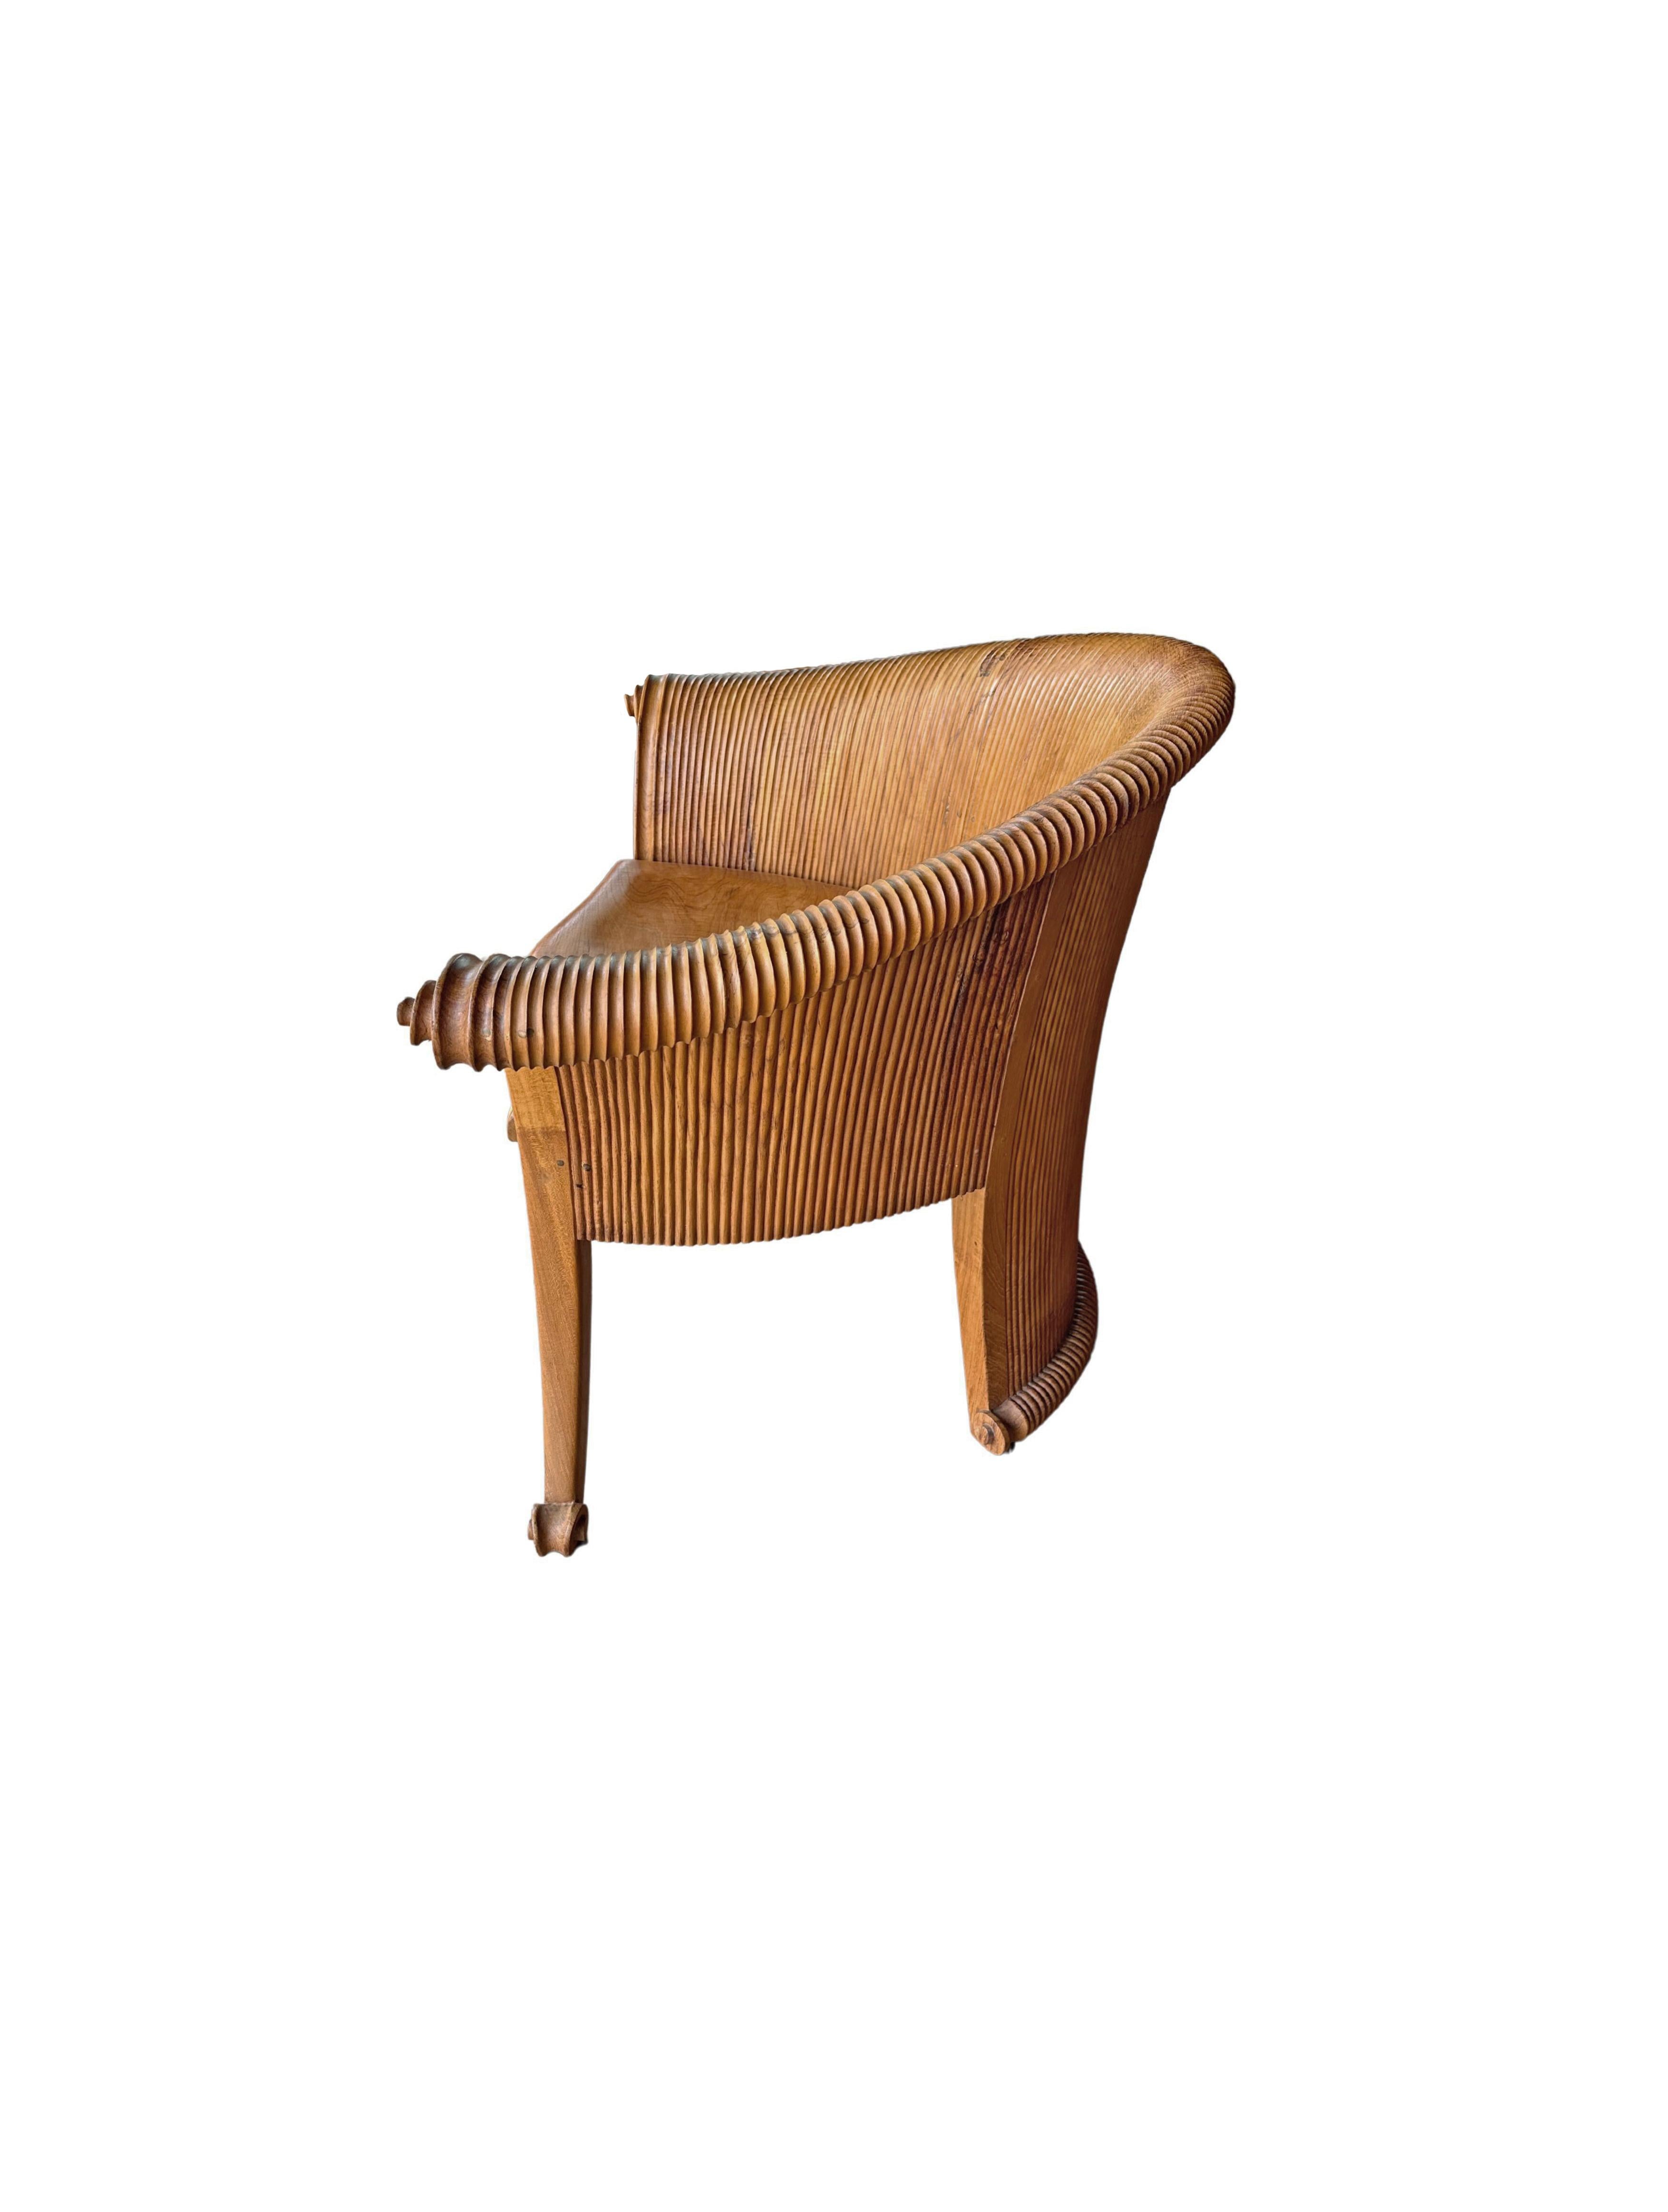 Sculptural Teak Wood Chair with Carved Detailing In New Condition For Sale In Jimbaran, Bali